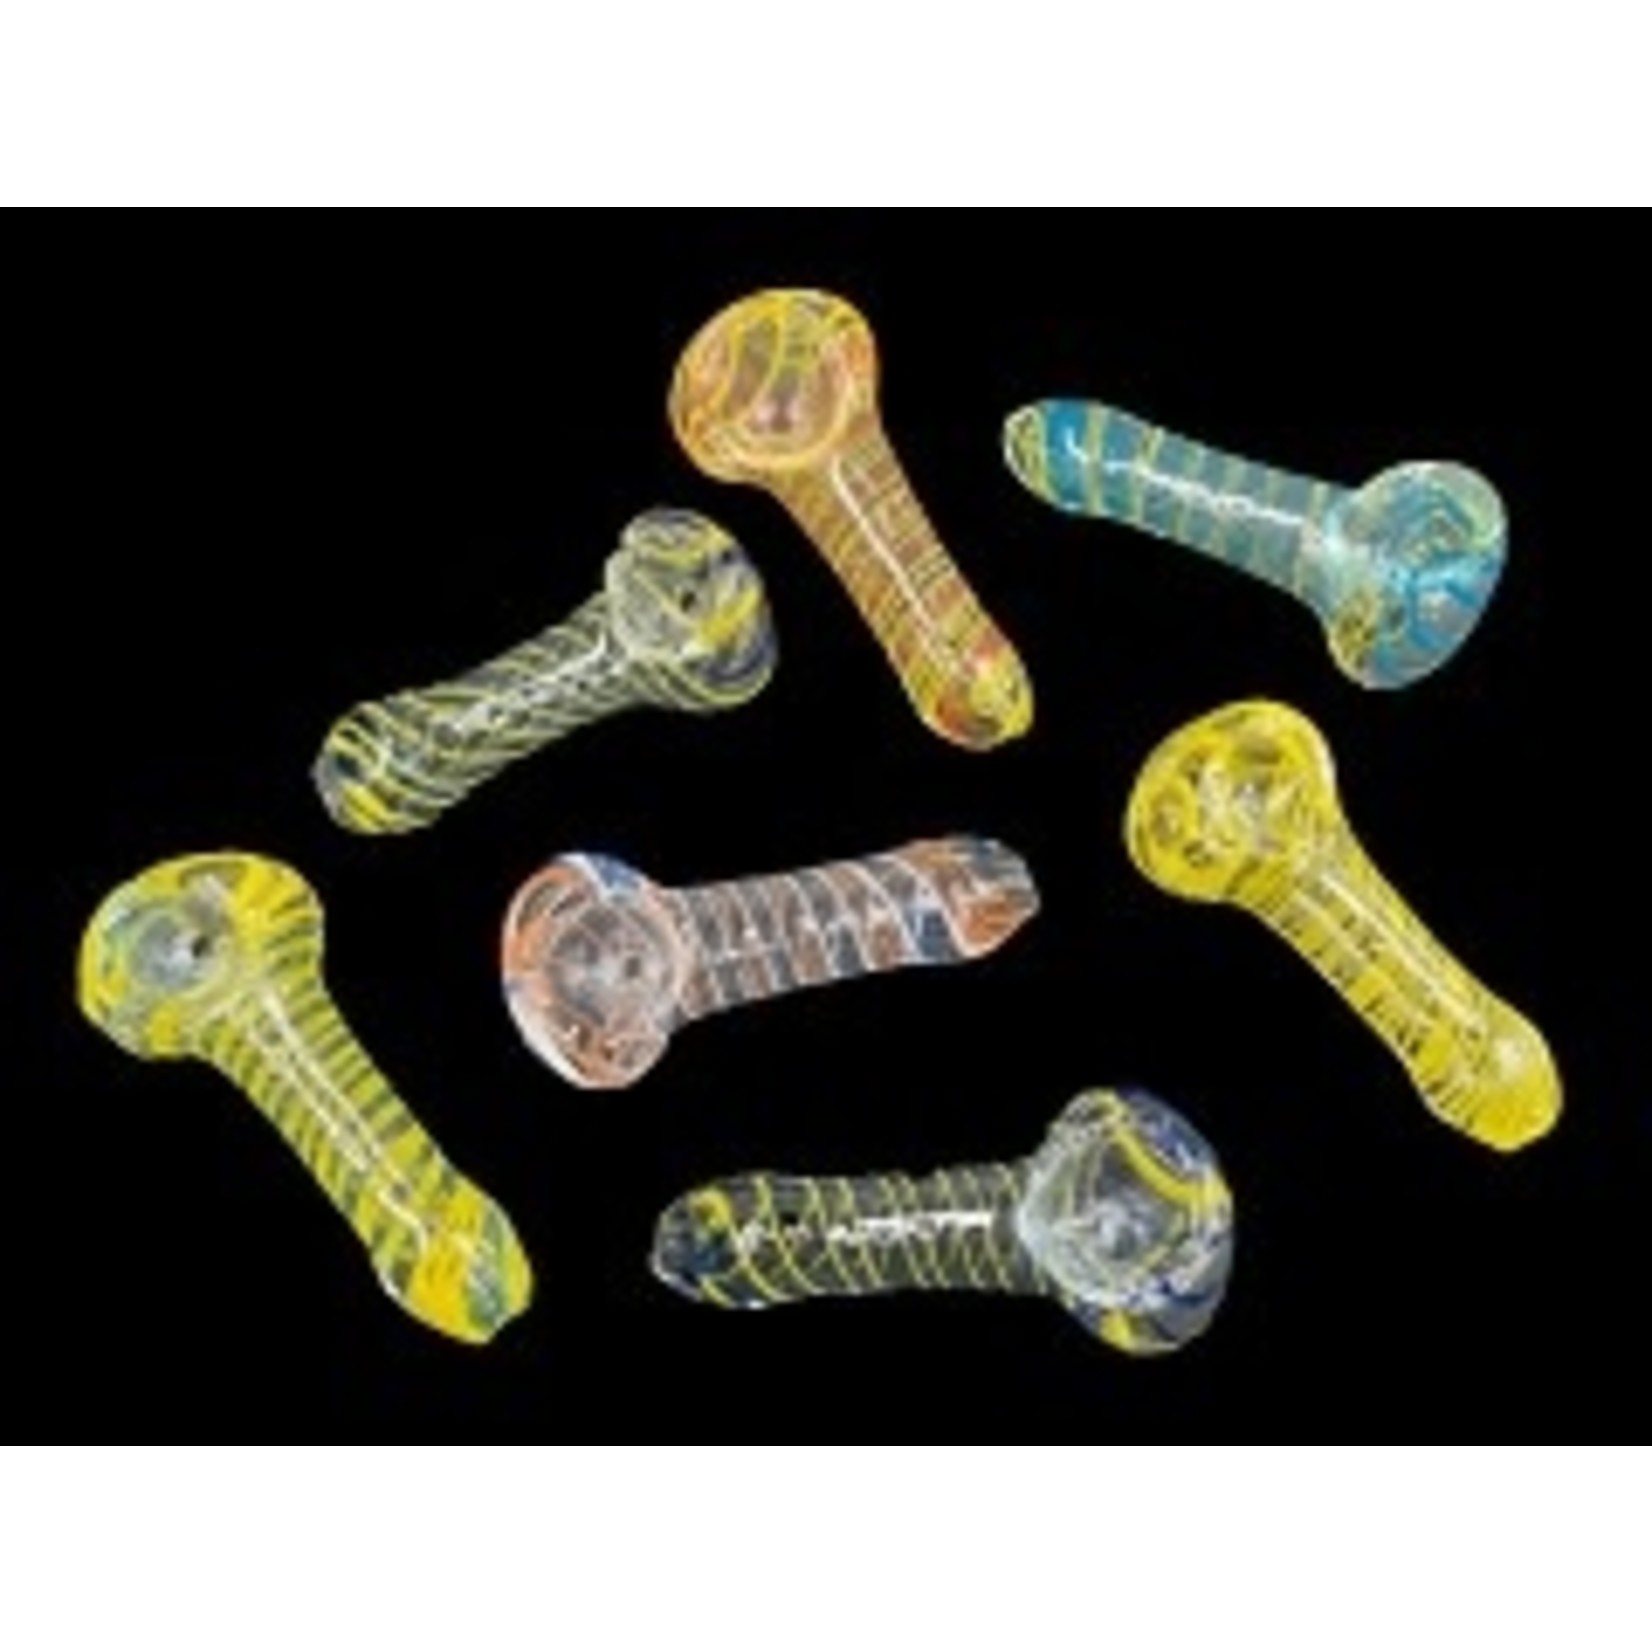 2.5-3" Mixed Colored Swirl Glass Pipe